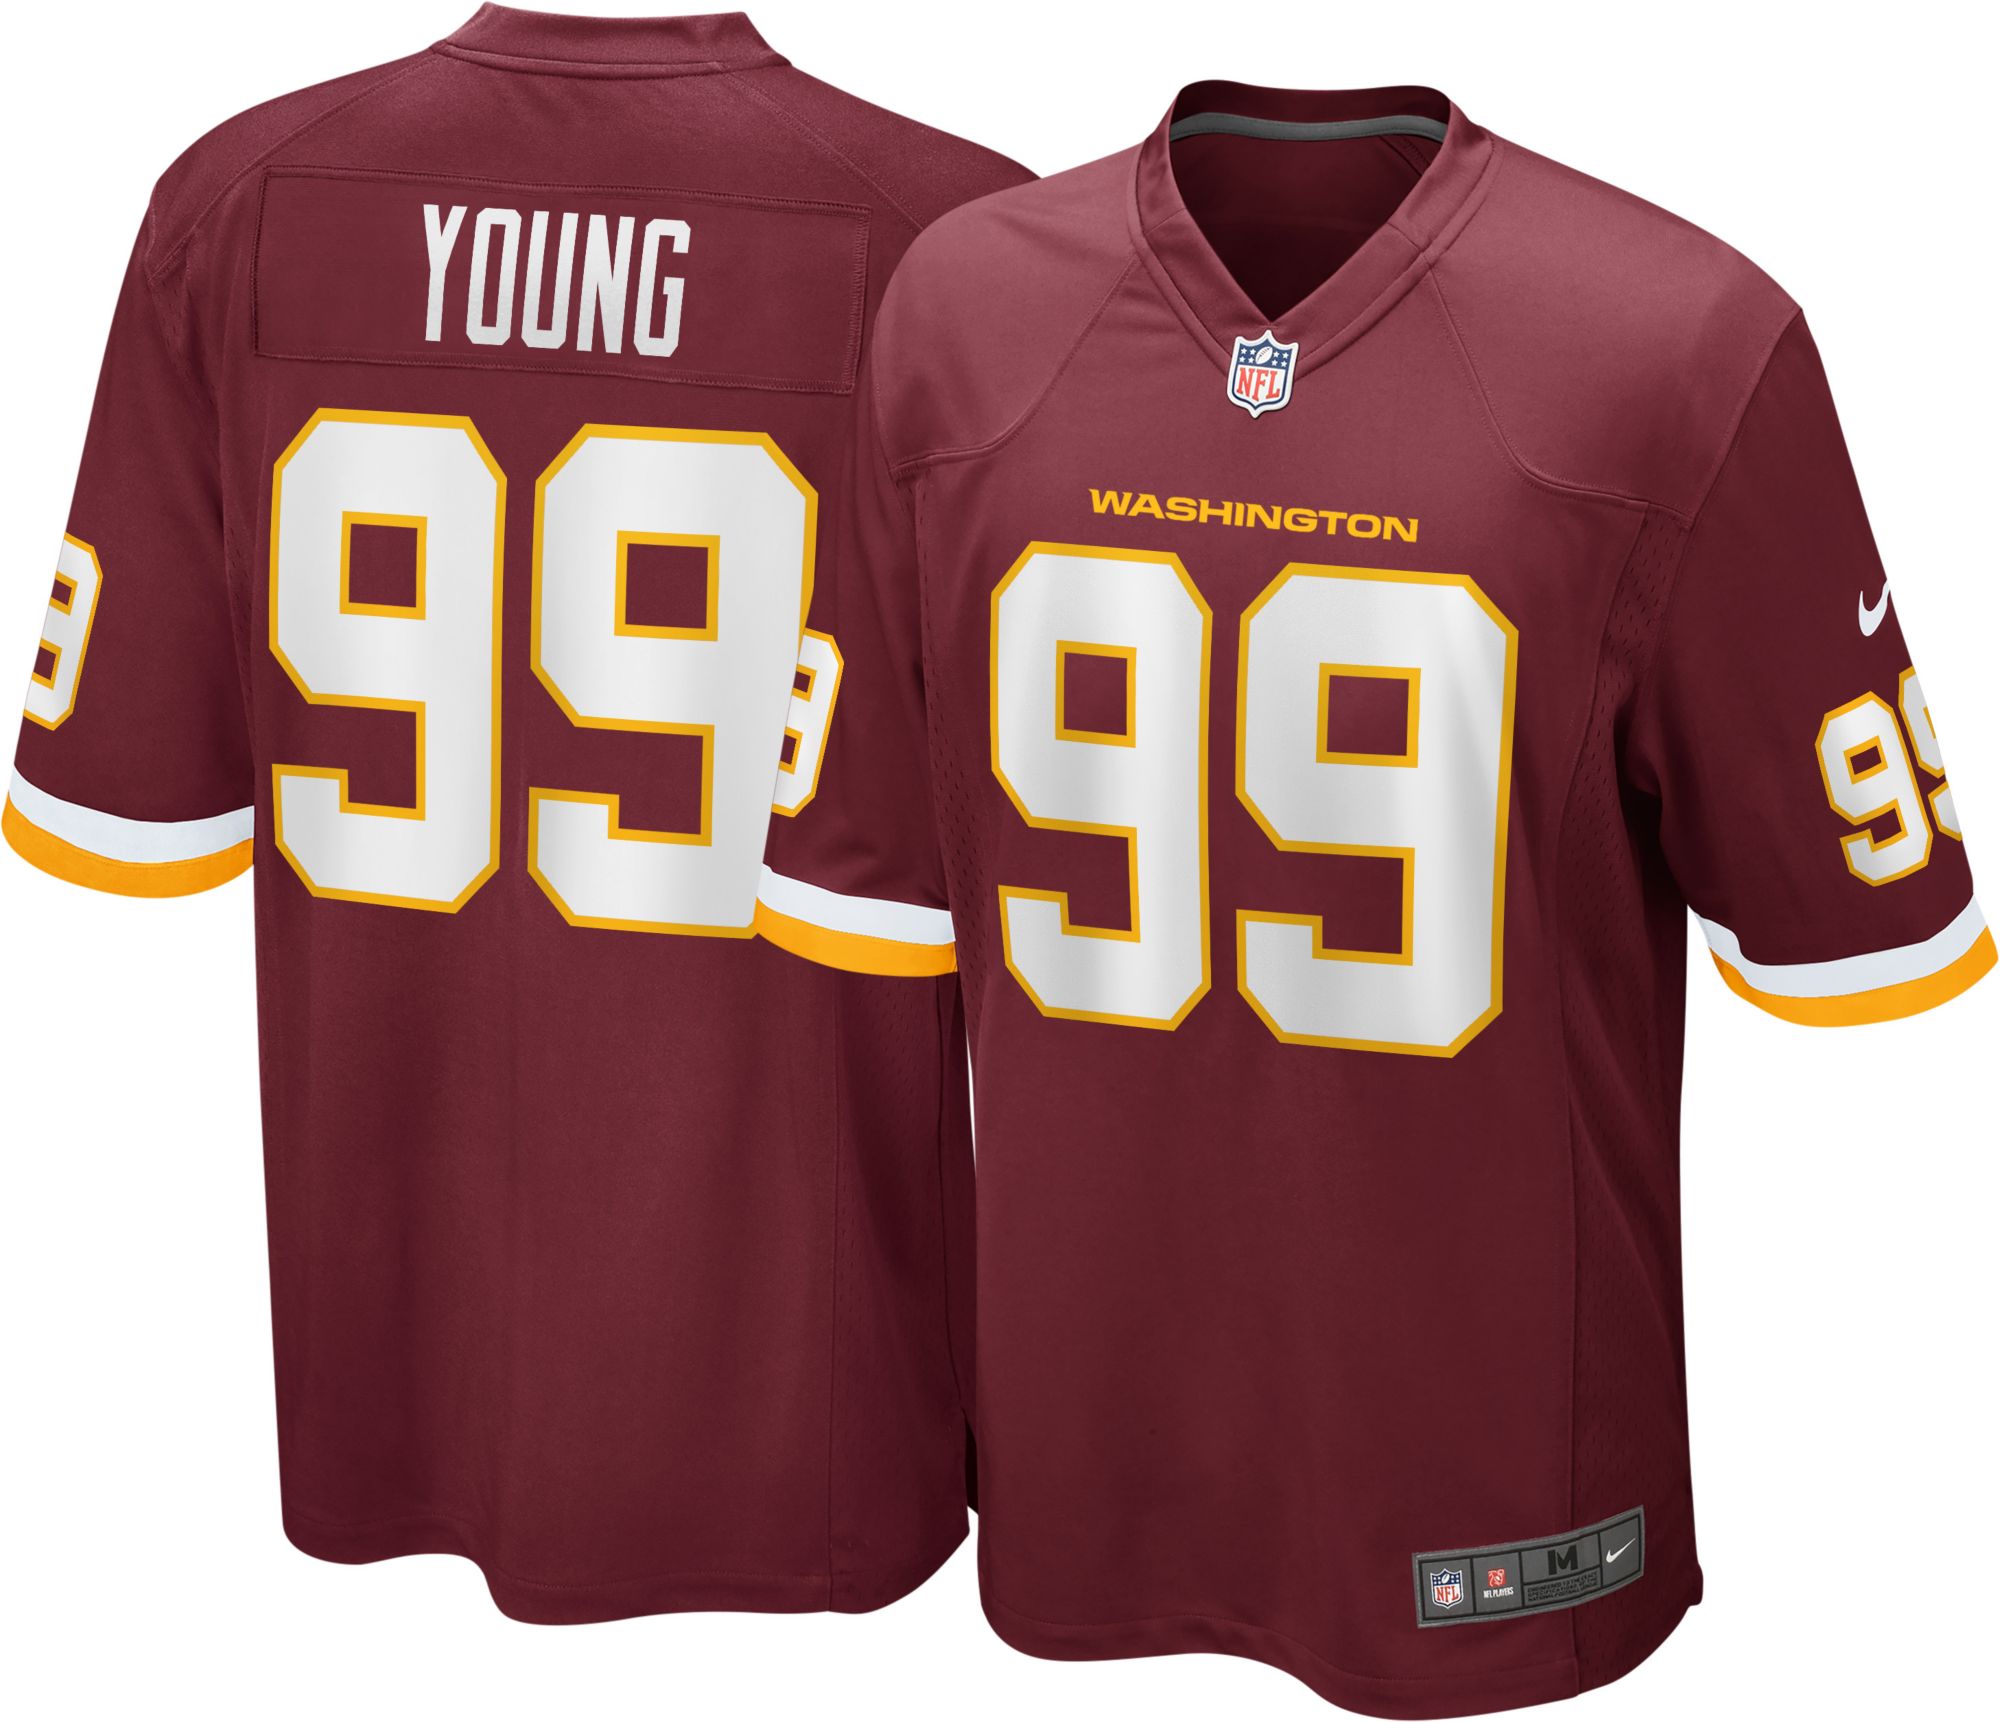 chase young football jersey